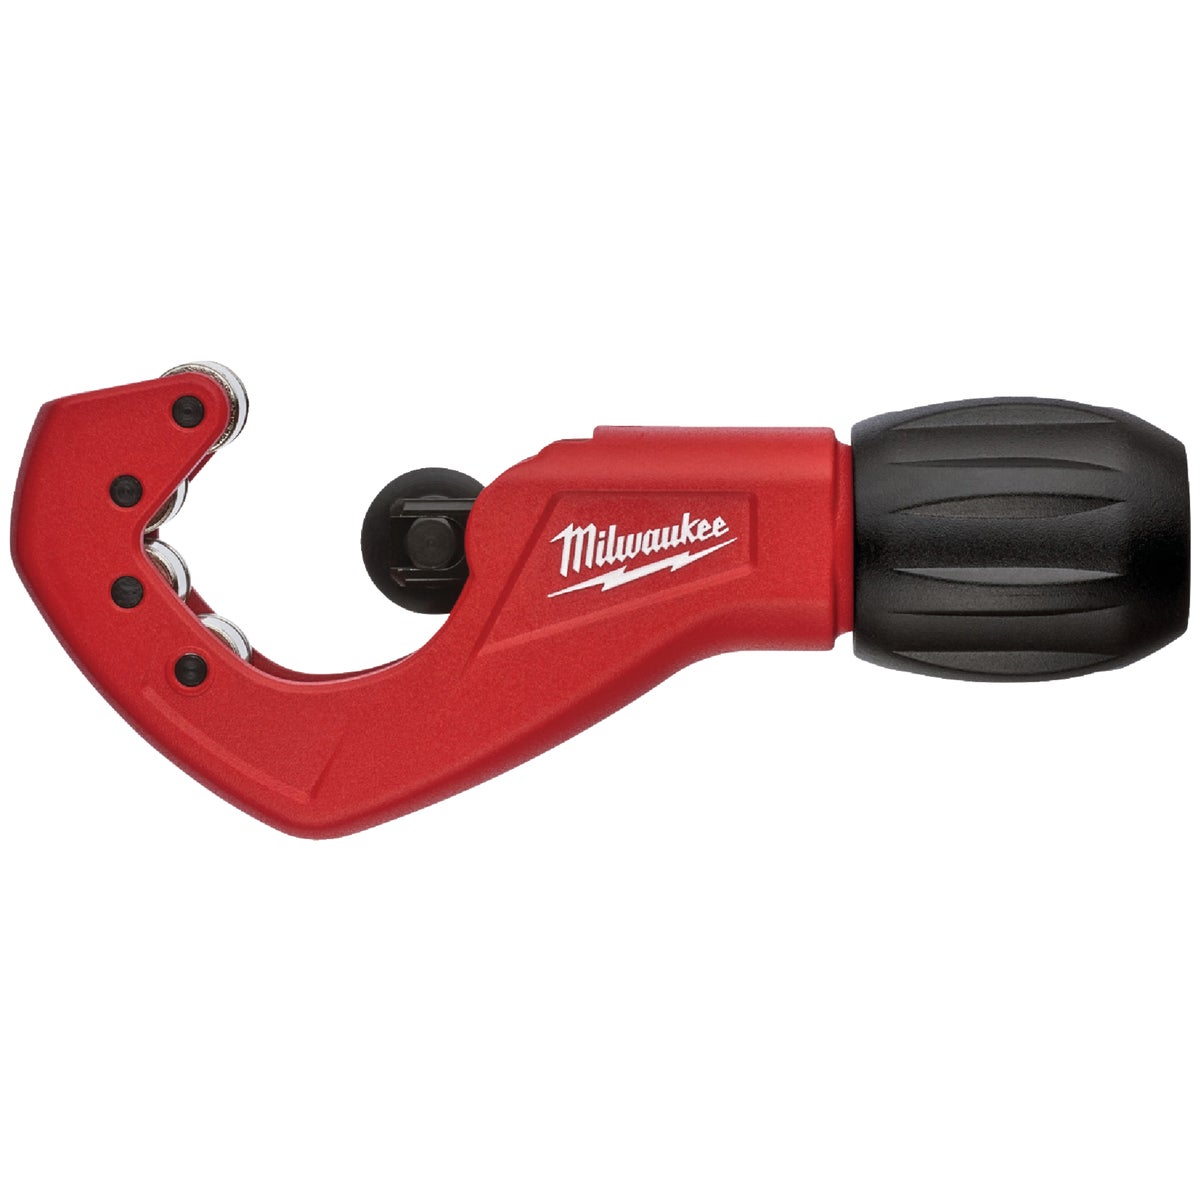 Milwaukee 1 In. Constant Swing Copper Tubing Cutter, 1/8 In. to 1-1/8 In. Pipe Capacity